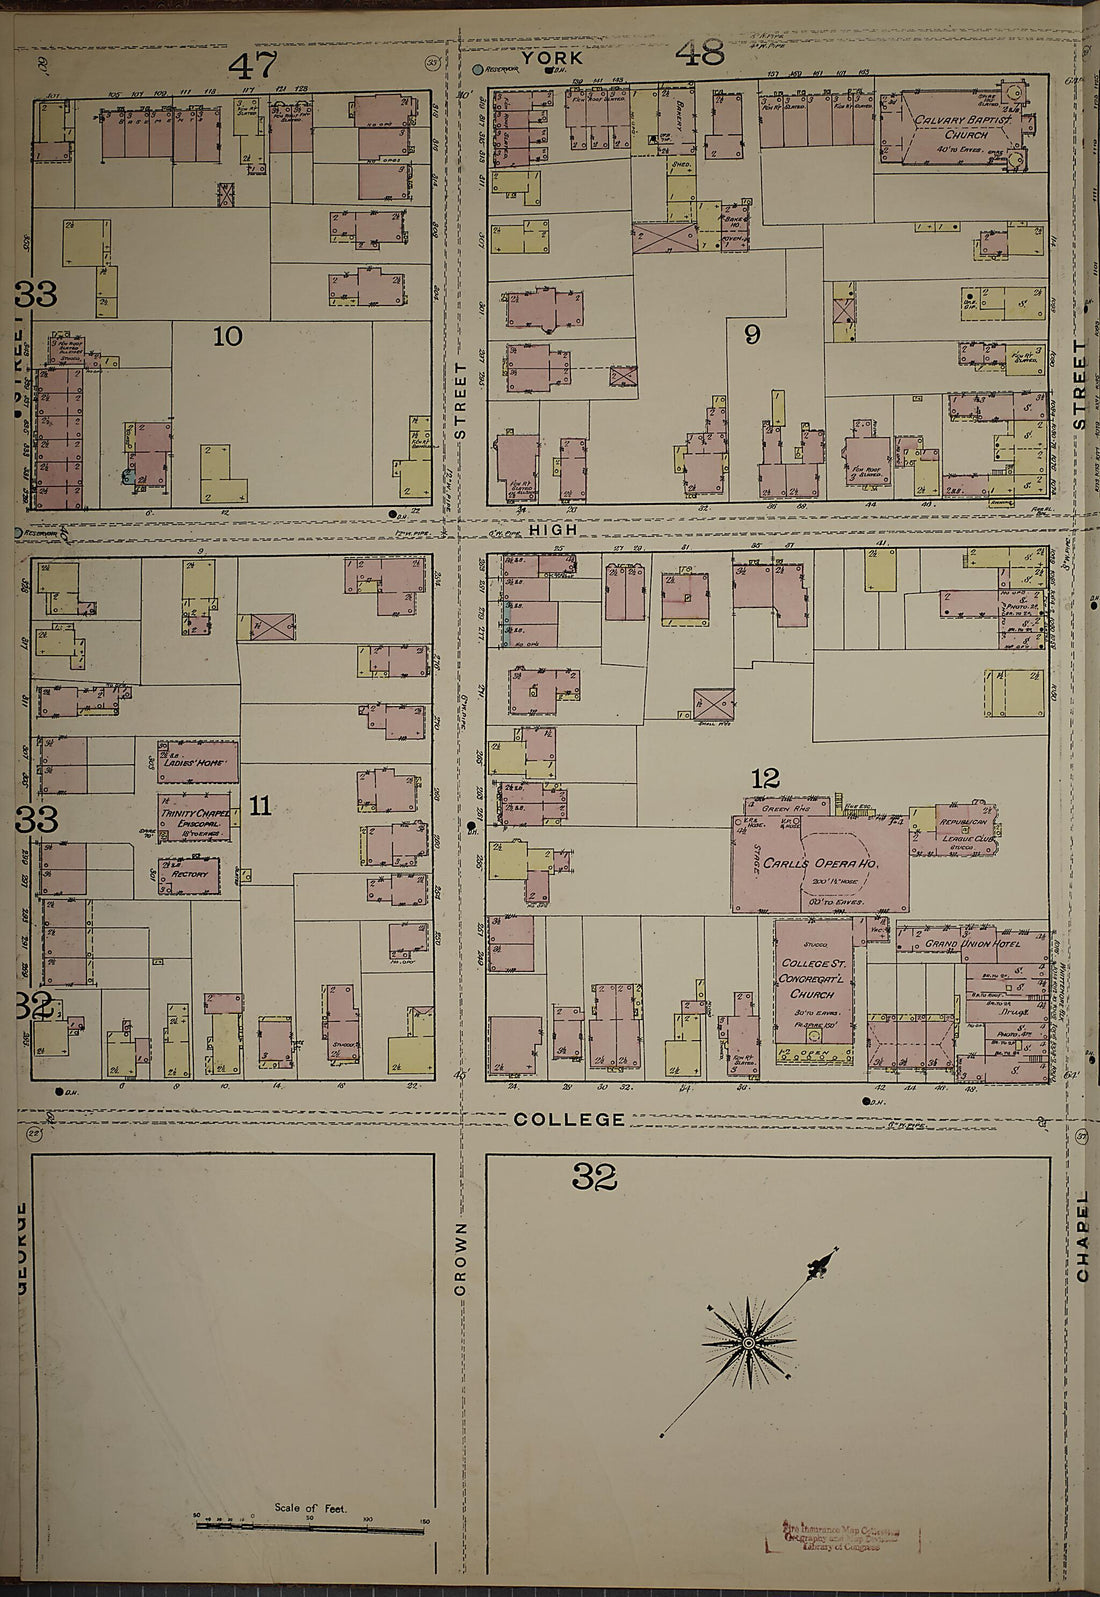 This old map of New Haven, New Haven County, Connecticut was created by Sanborn Map Company in 1886